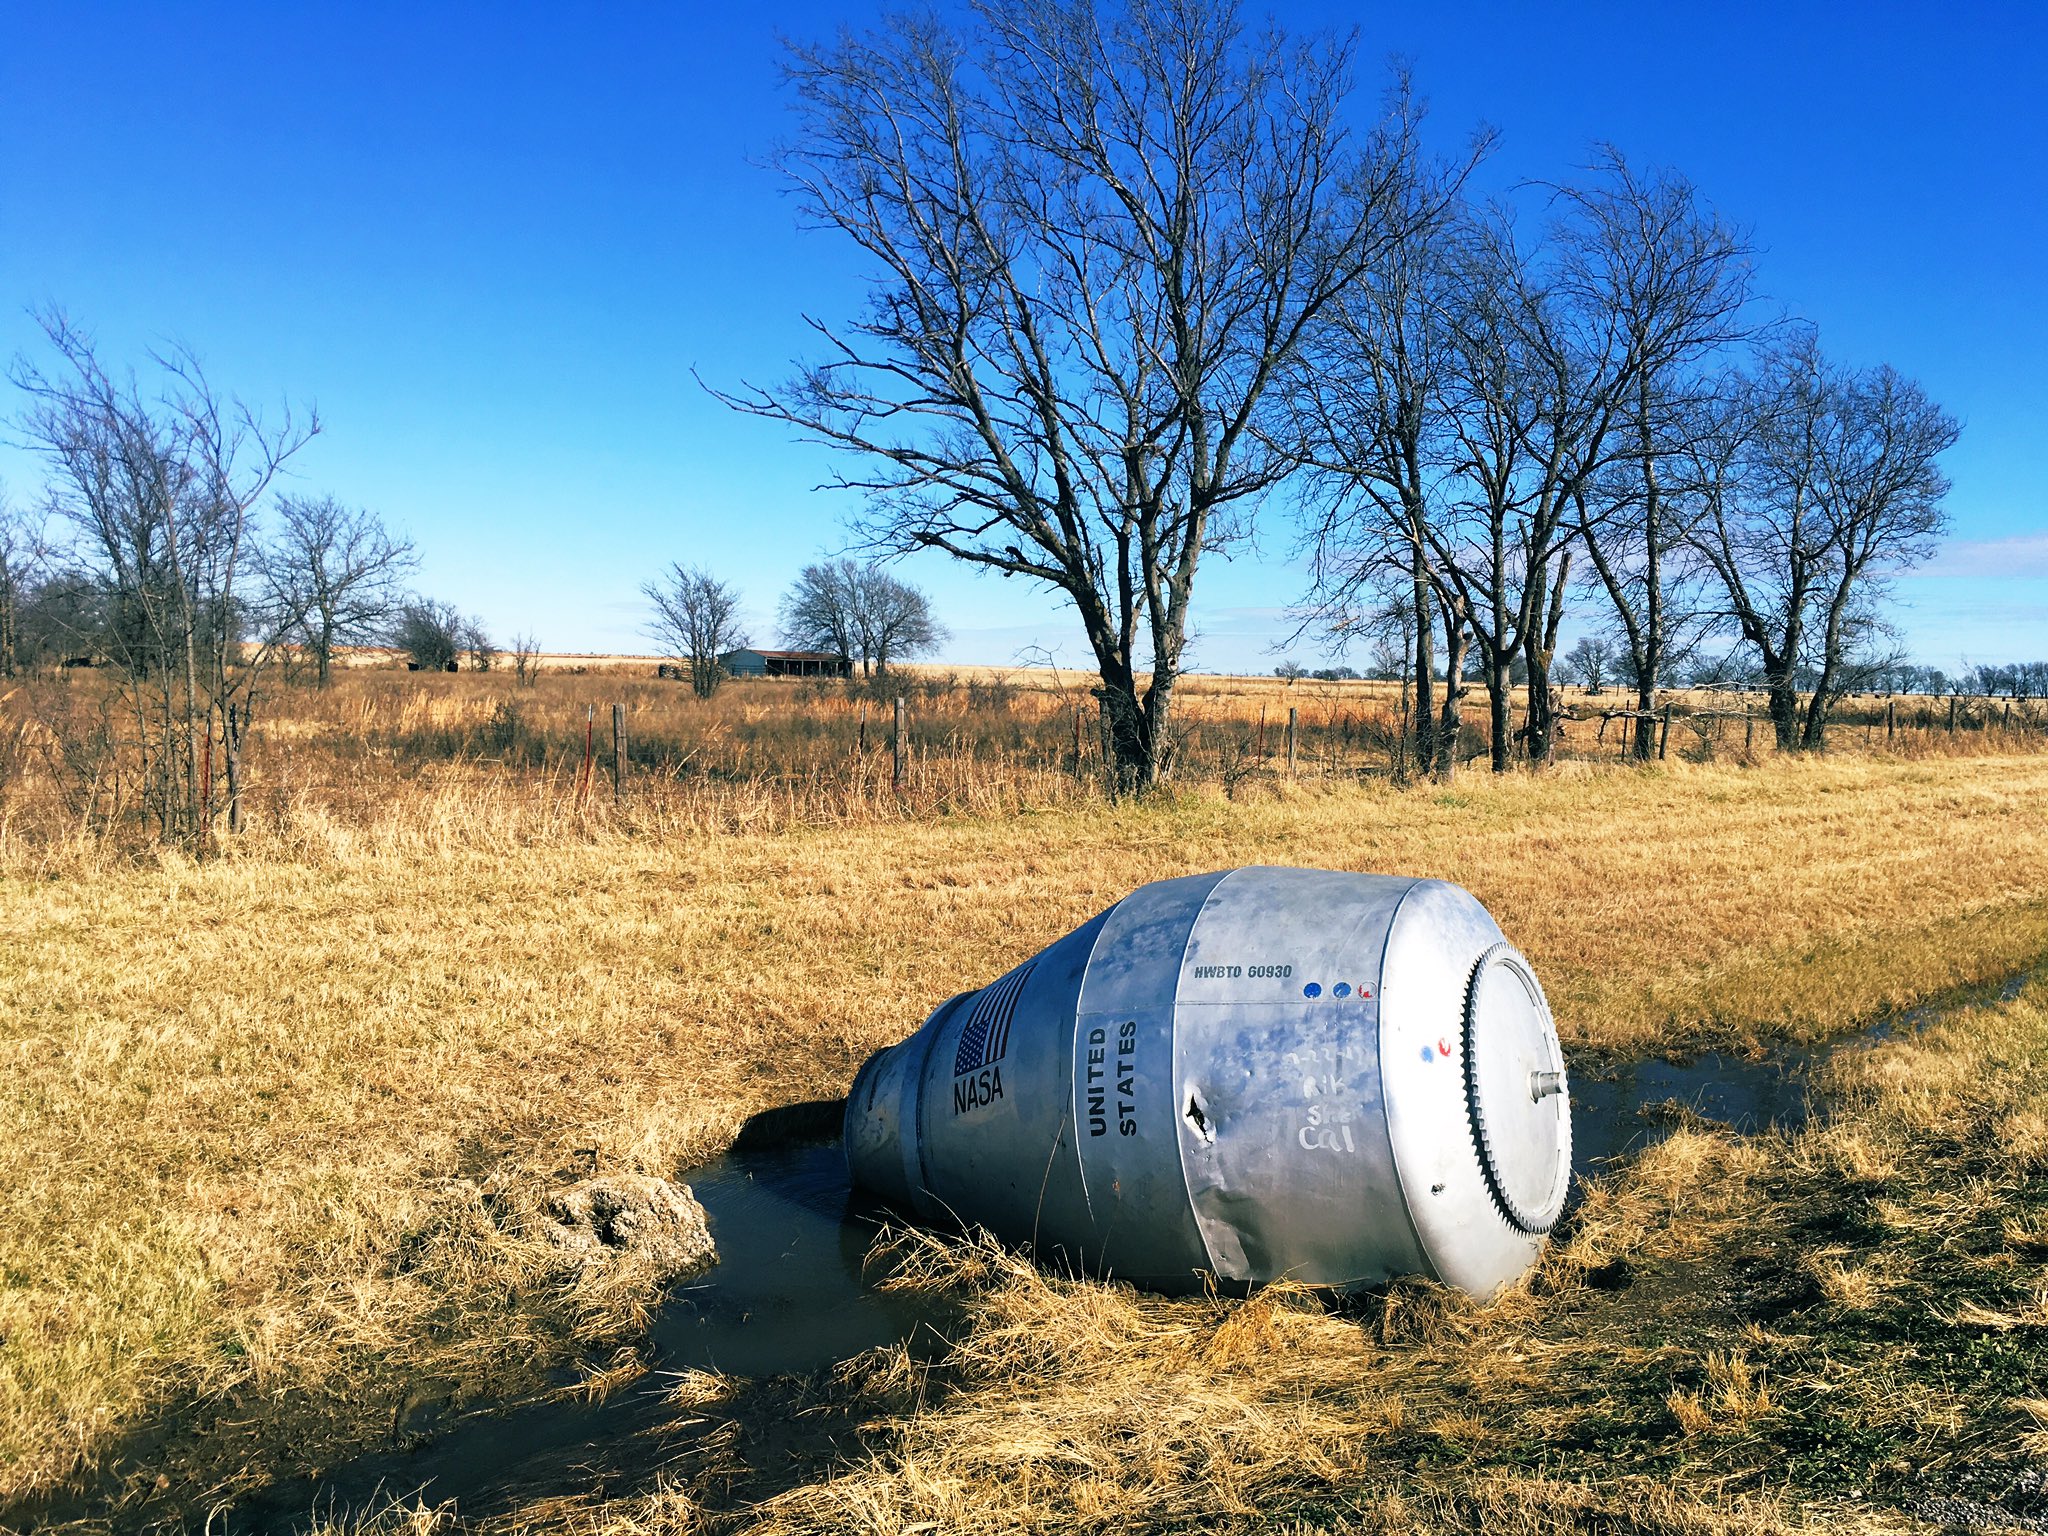 Mike Senese on Twitter: "Back in 1959 a cement mixer crashed on a side road  in rural Oklahoma. Too heavy to move, it's sat there for decades, decorated  (more recently) by locals